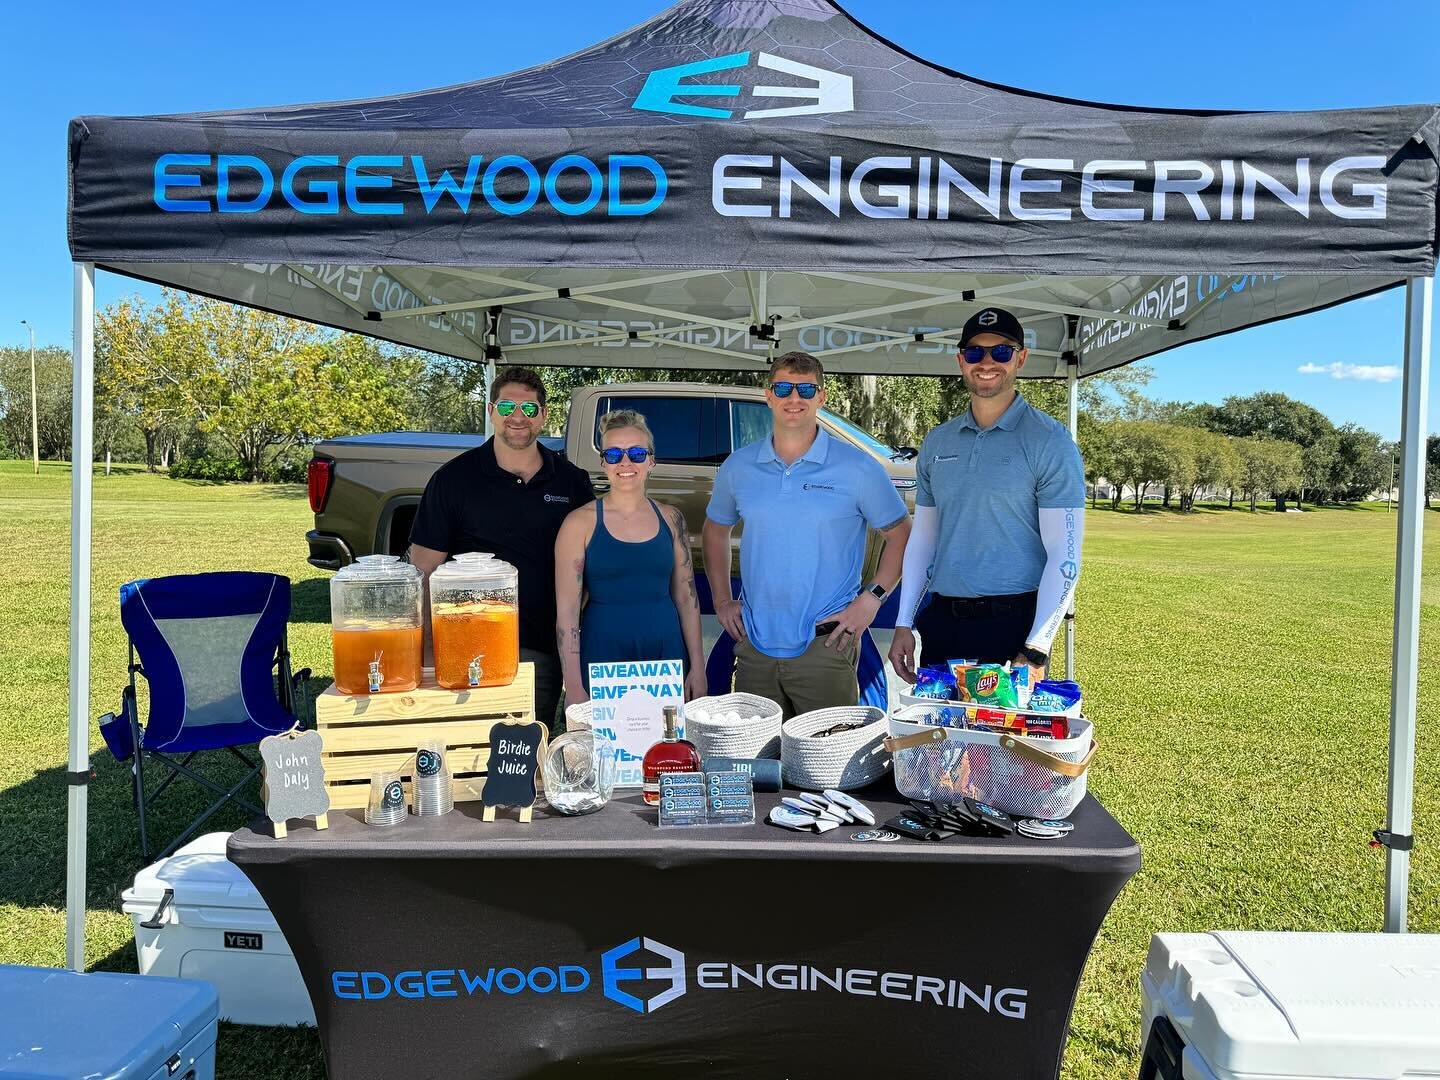 Enjoying this perfect day for golf at the OCA Fall Golf tournament! Always nice to catch up with old friends and meet new people in the industry! #forensicengineering